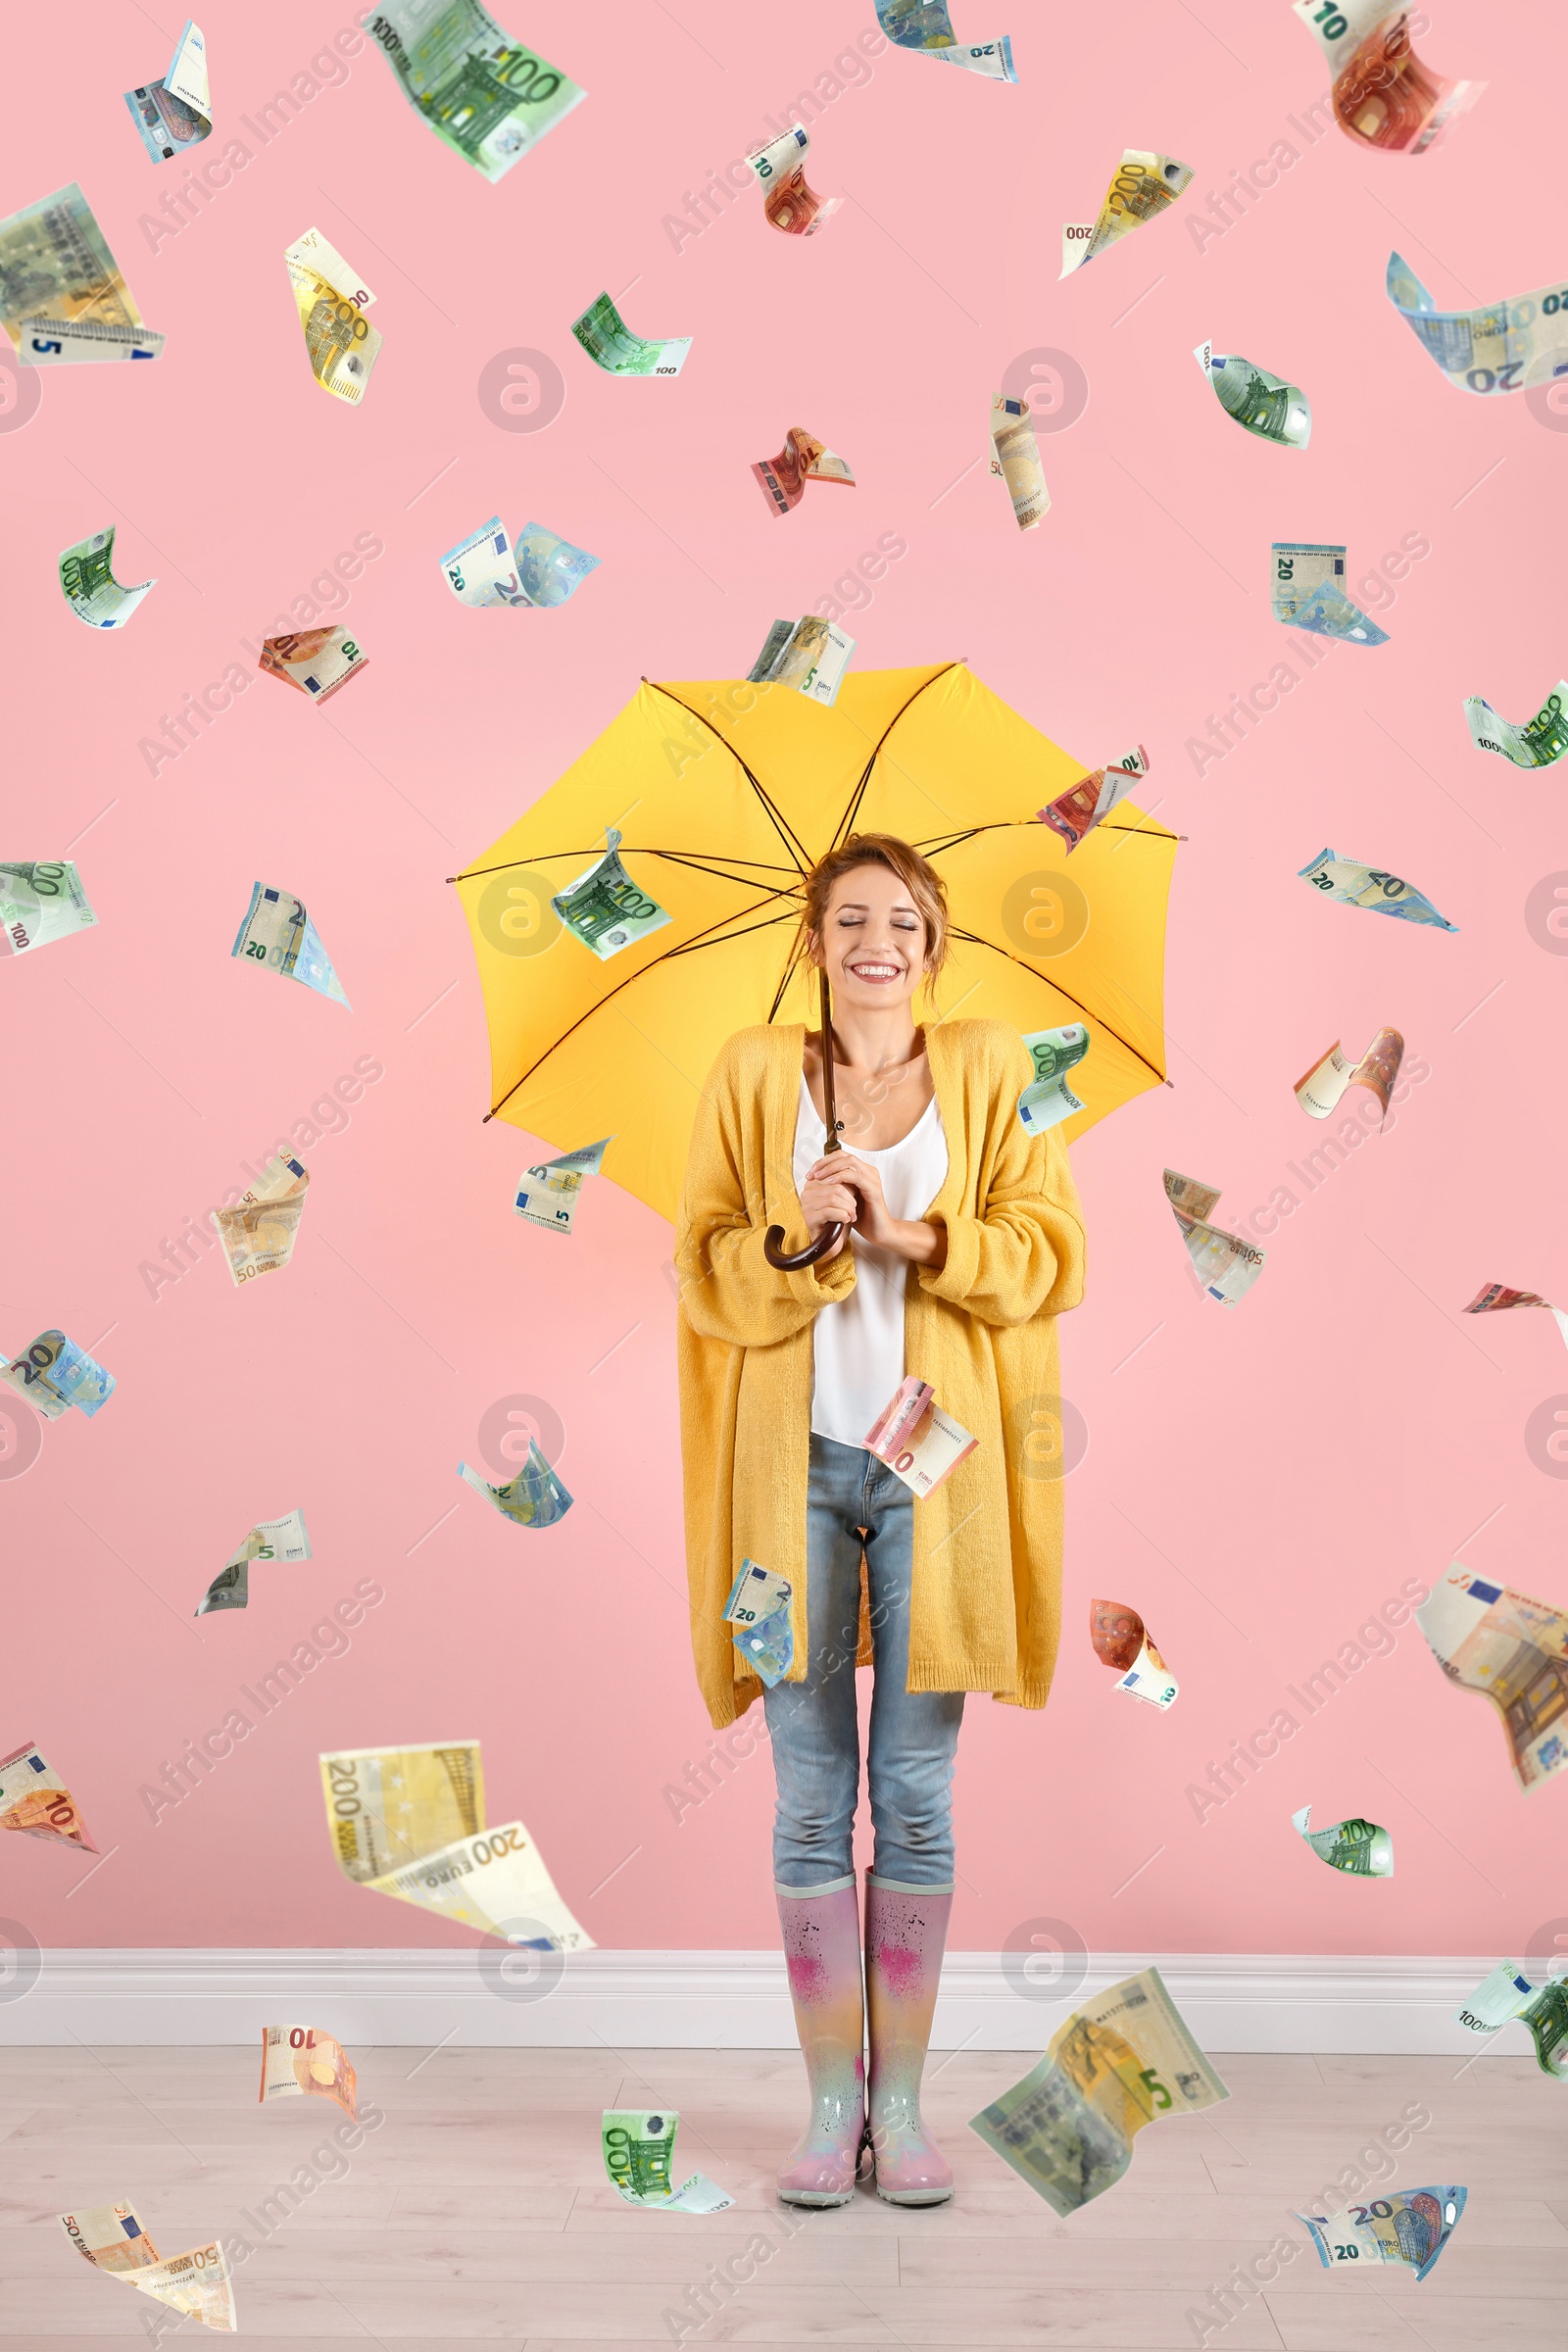 Image of Woman with yellow umbrella under money rain on color background 